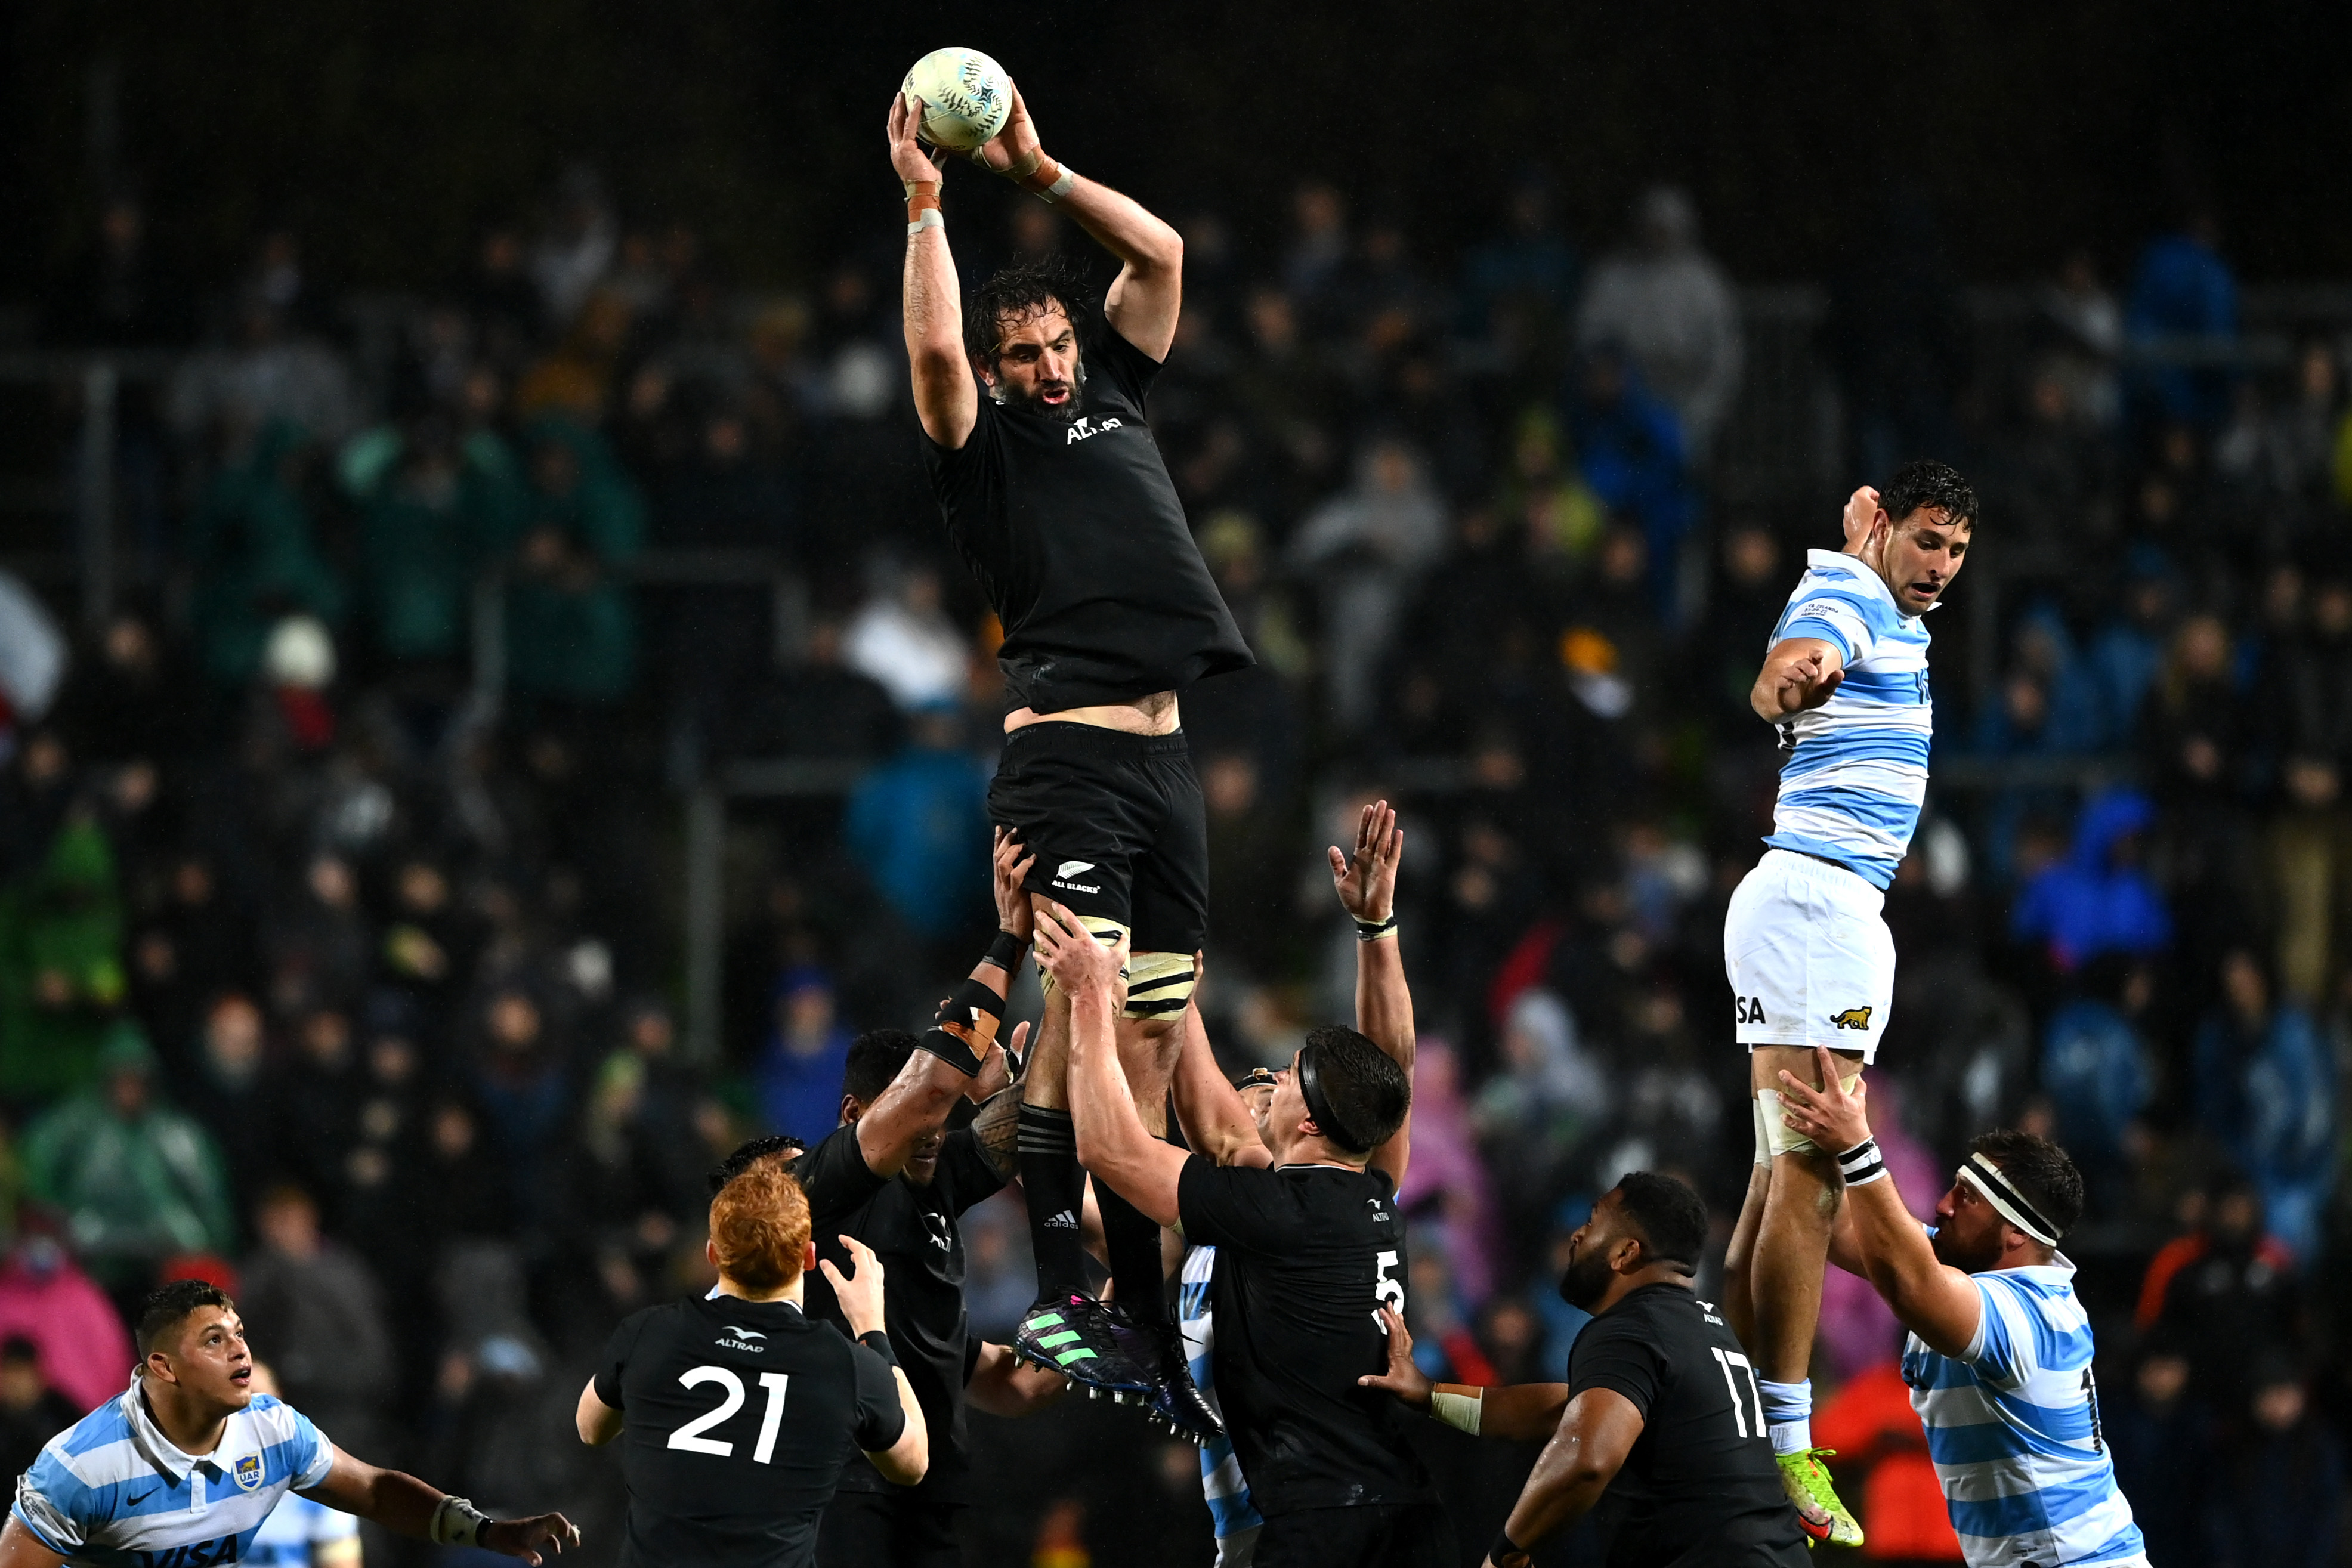 HAMILTON, NEW ZEALAND - SEPTEMBER 03: Sam Whitelock of the All Blacks wins lineout ball during The Rugby Championship match between the New Zealand All Blacks and Argentina Pumas at FMG Stadium Waikato on September 03, 2022 in Hamilton, New Zealand. (Photo by Hannah Peters/Getty Images)